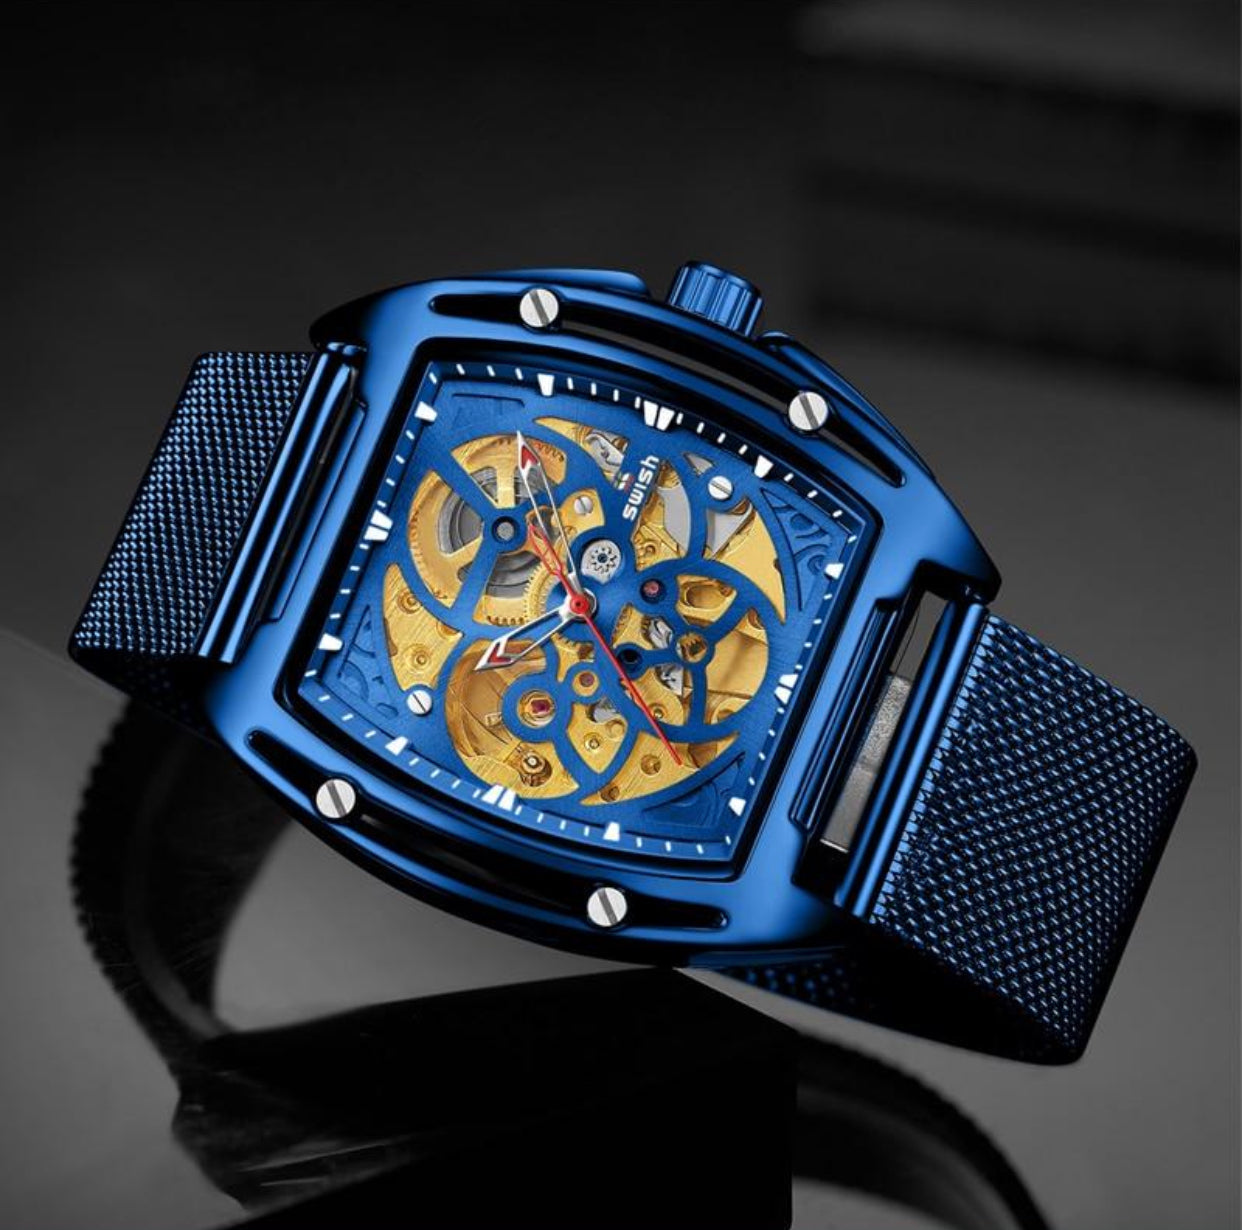 Mechanical Automatic Gold Watch with Mesh Bracelet